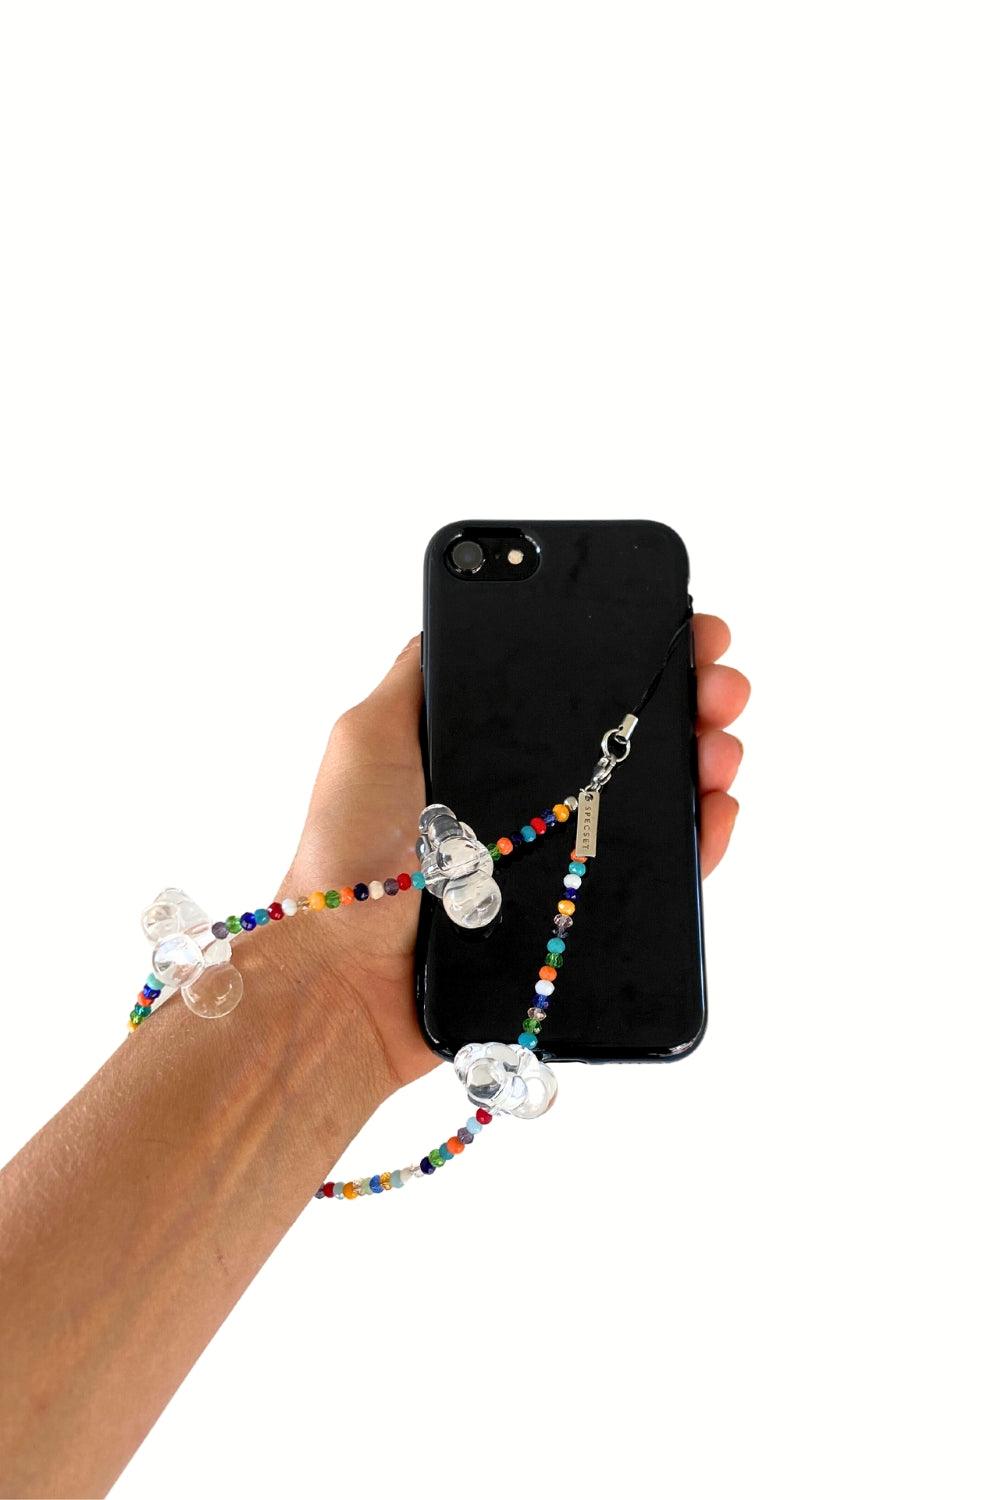 BRIGHT SKY - COLORFUL Wrist Phone Strap | SPECSET